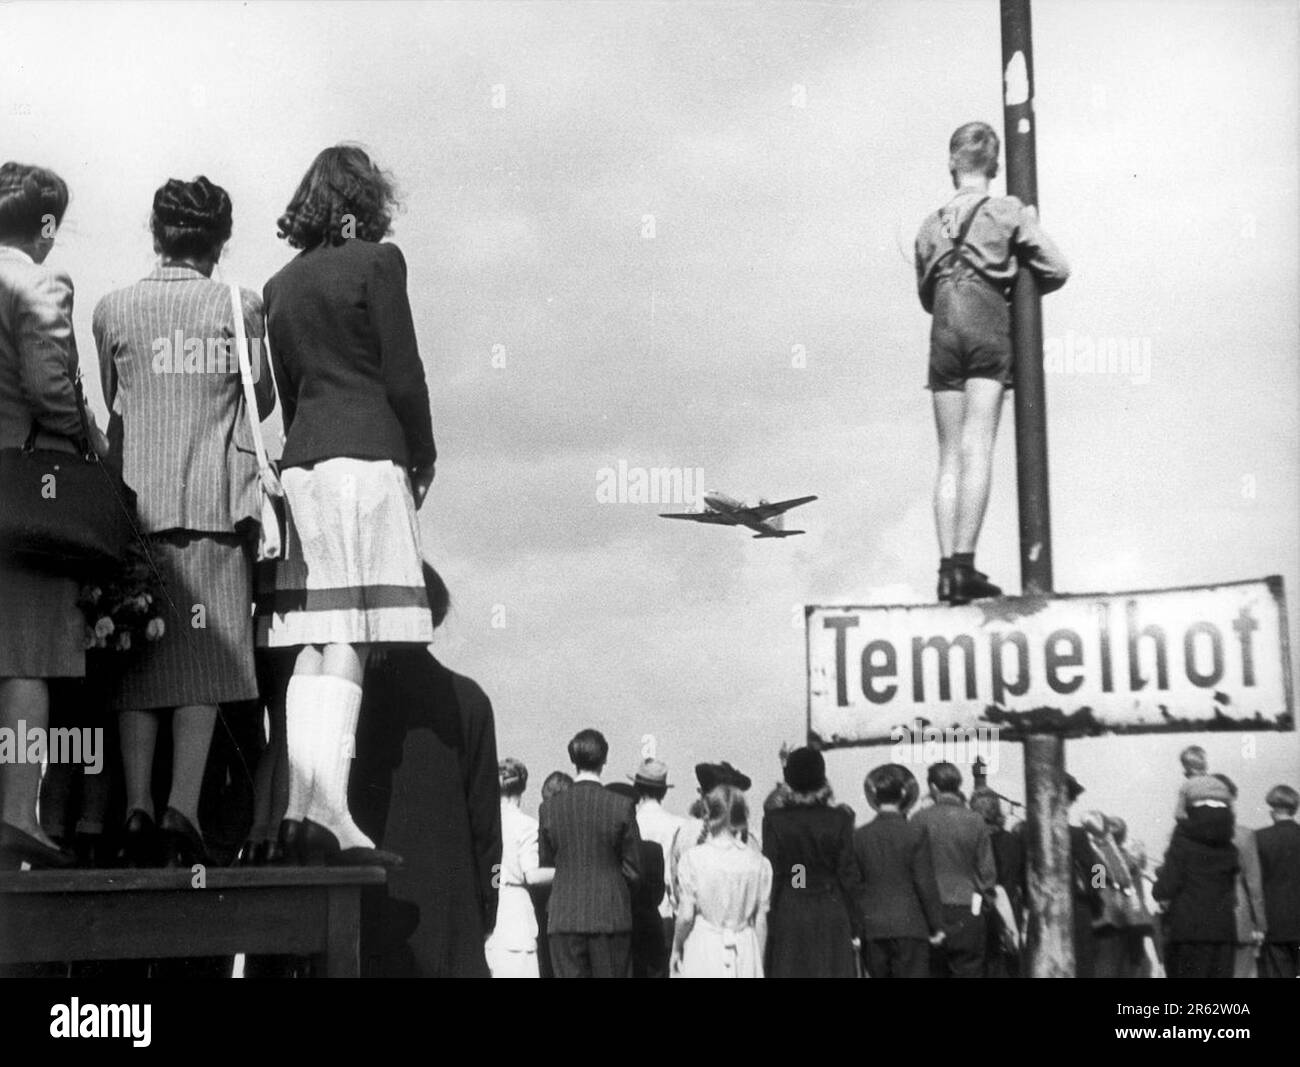 Germans watching supply planes at Tempelhof airport during the Berlin Airlift. In response escalating tensions and to the establishment of.a new West German currency, the Soviets cut off all land communications to West Berlin and stopped sending food there. TheAllied response was an eleven month campaign to supply W Berlin with the 5000 tons per day of food and fuel it needed. A plane landed every three minutes day and night and the operation was so succesful that the Soviets had to back down and reopen the roads, railways and canals. Stock Photo